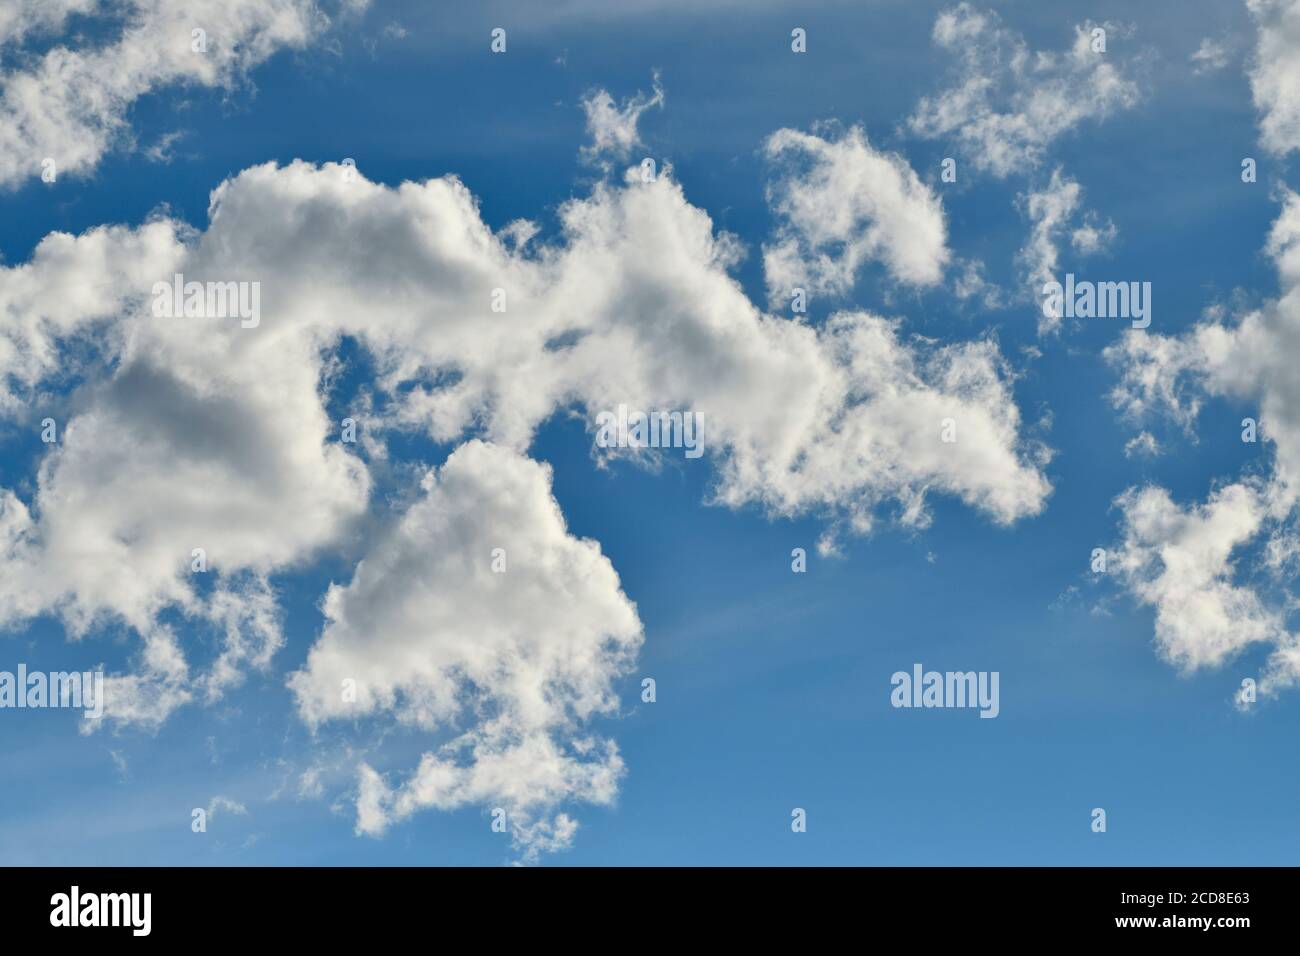 A horizontal image of a blue sky with white clouds in rural Alberta Canada Stock Photo